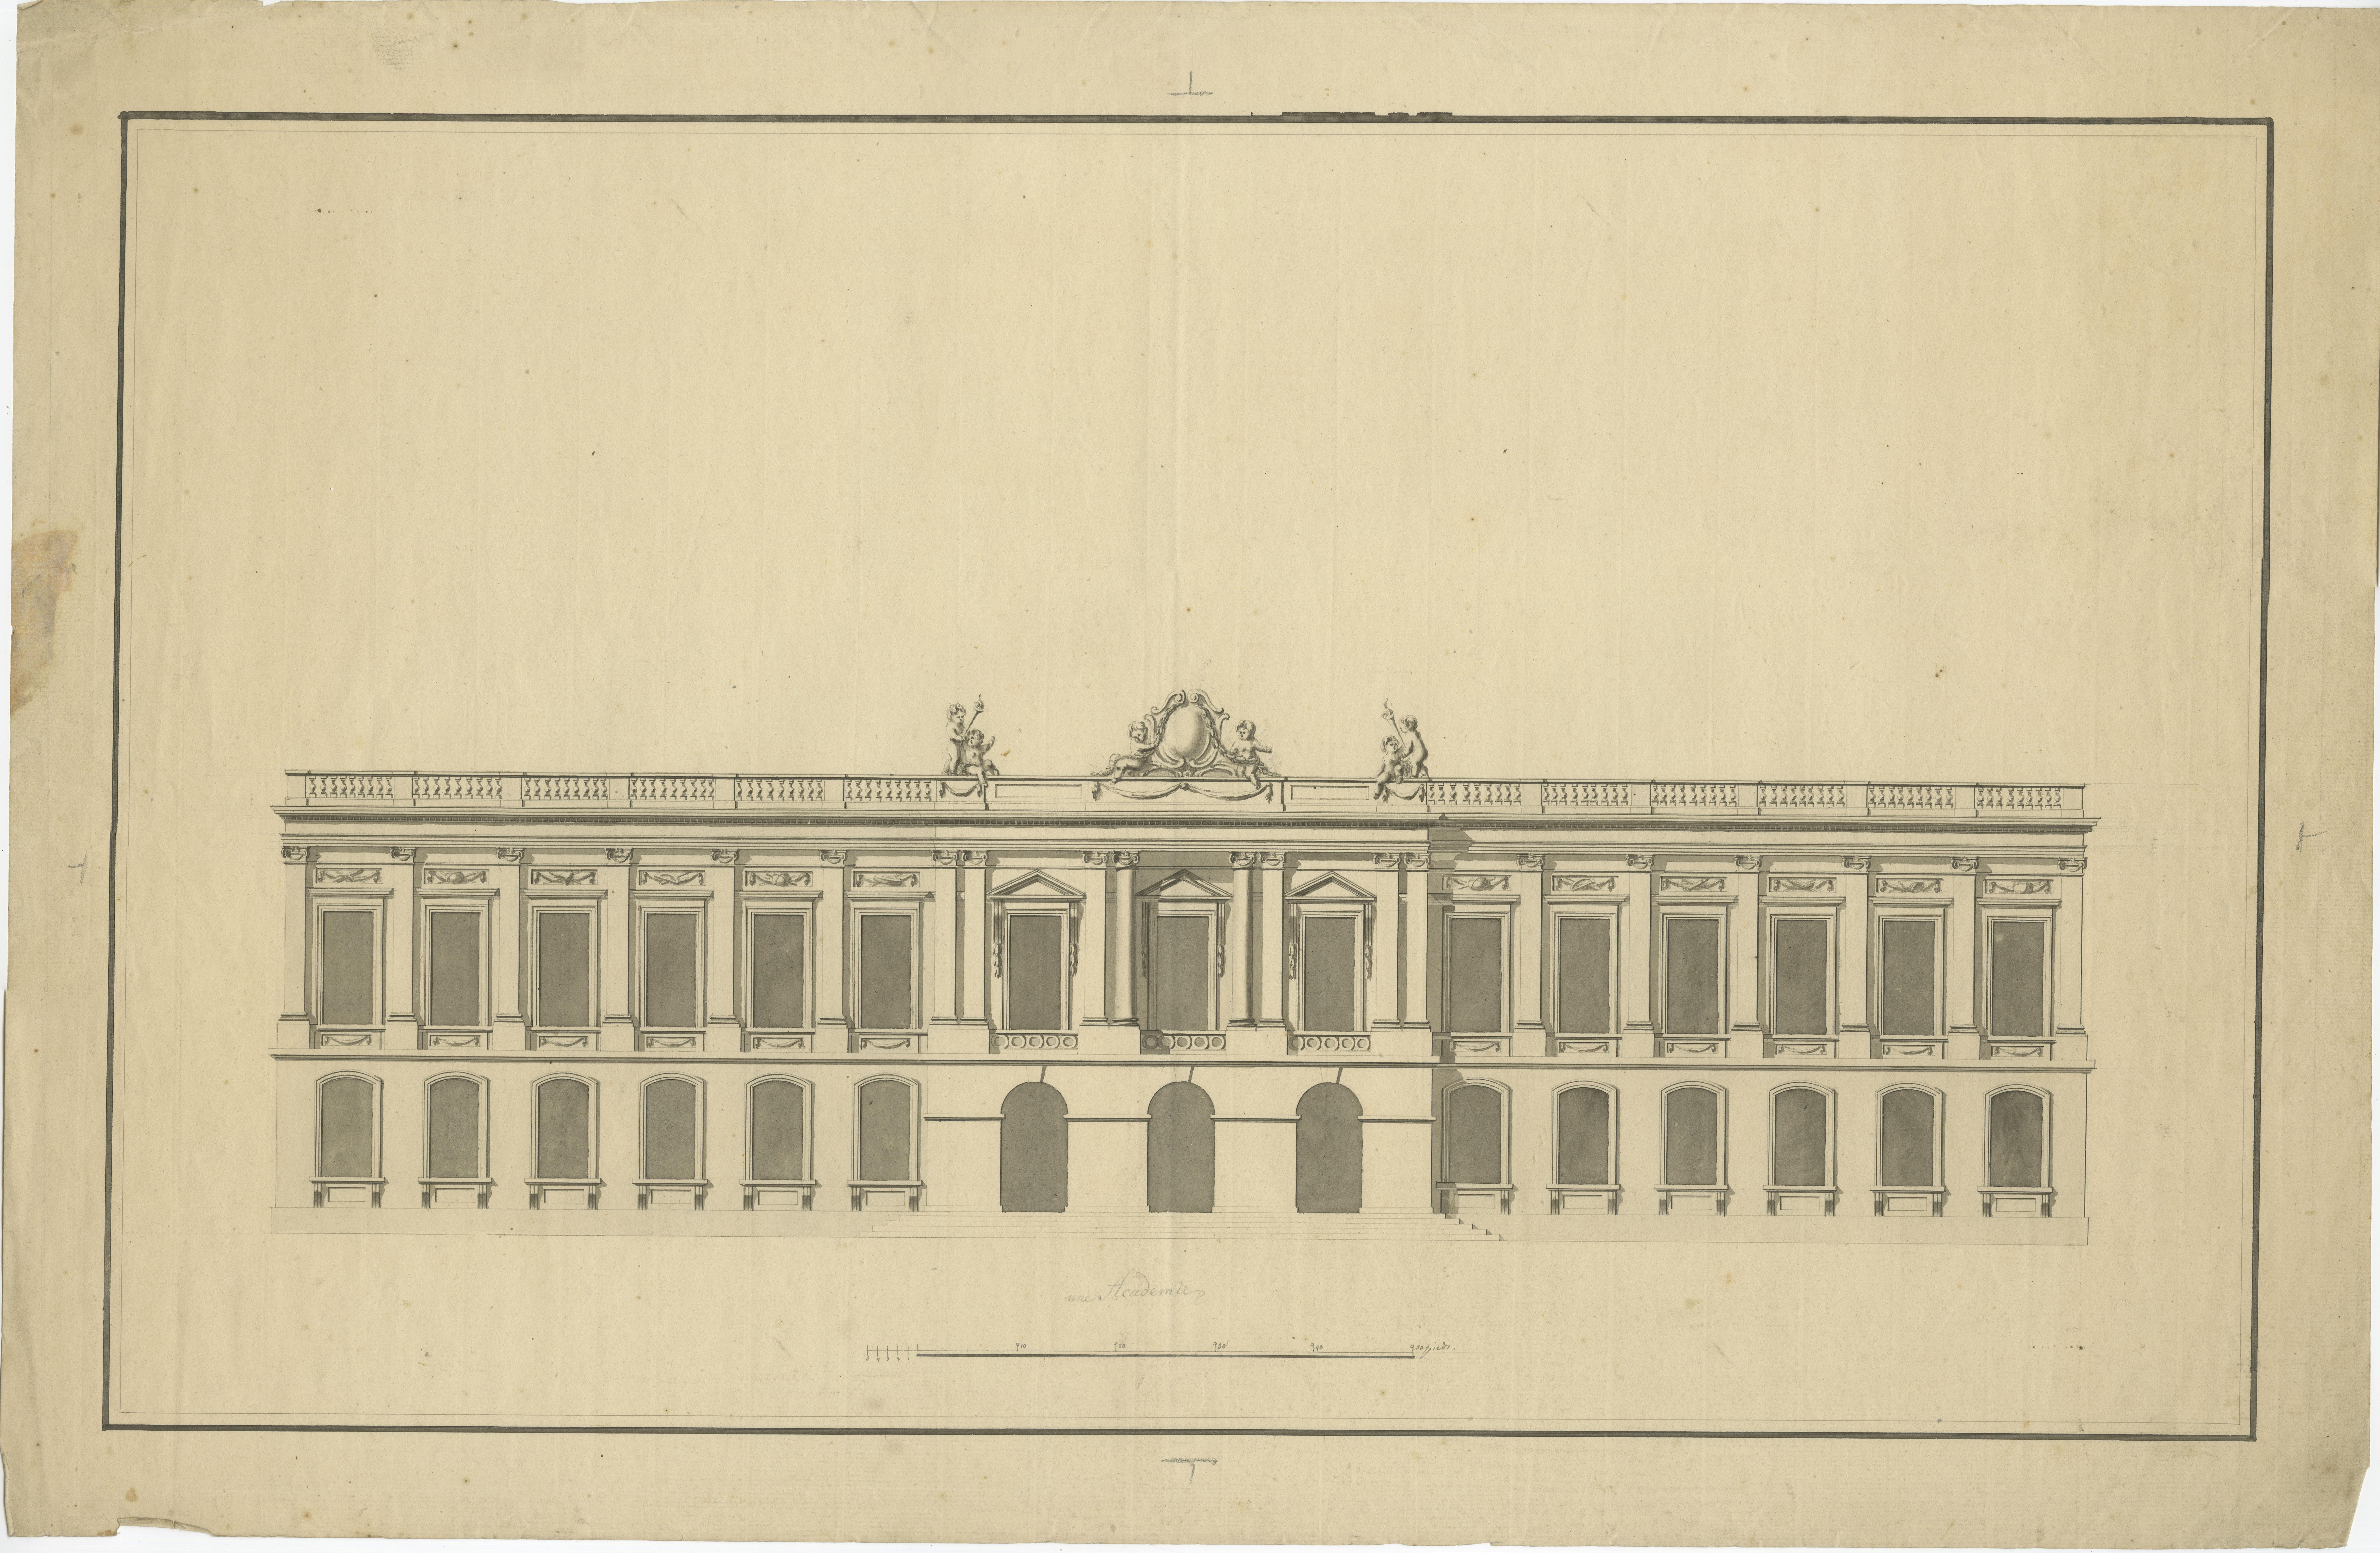 The engraving depicts a classical façade of a building, designed with a series of evenly spaced windows and arches on the ground floor, and rectangular windows on the upper floor. The architectural style is neoclassical, characterized by its